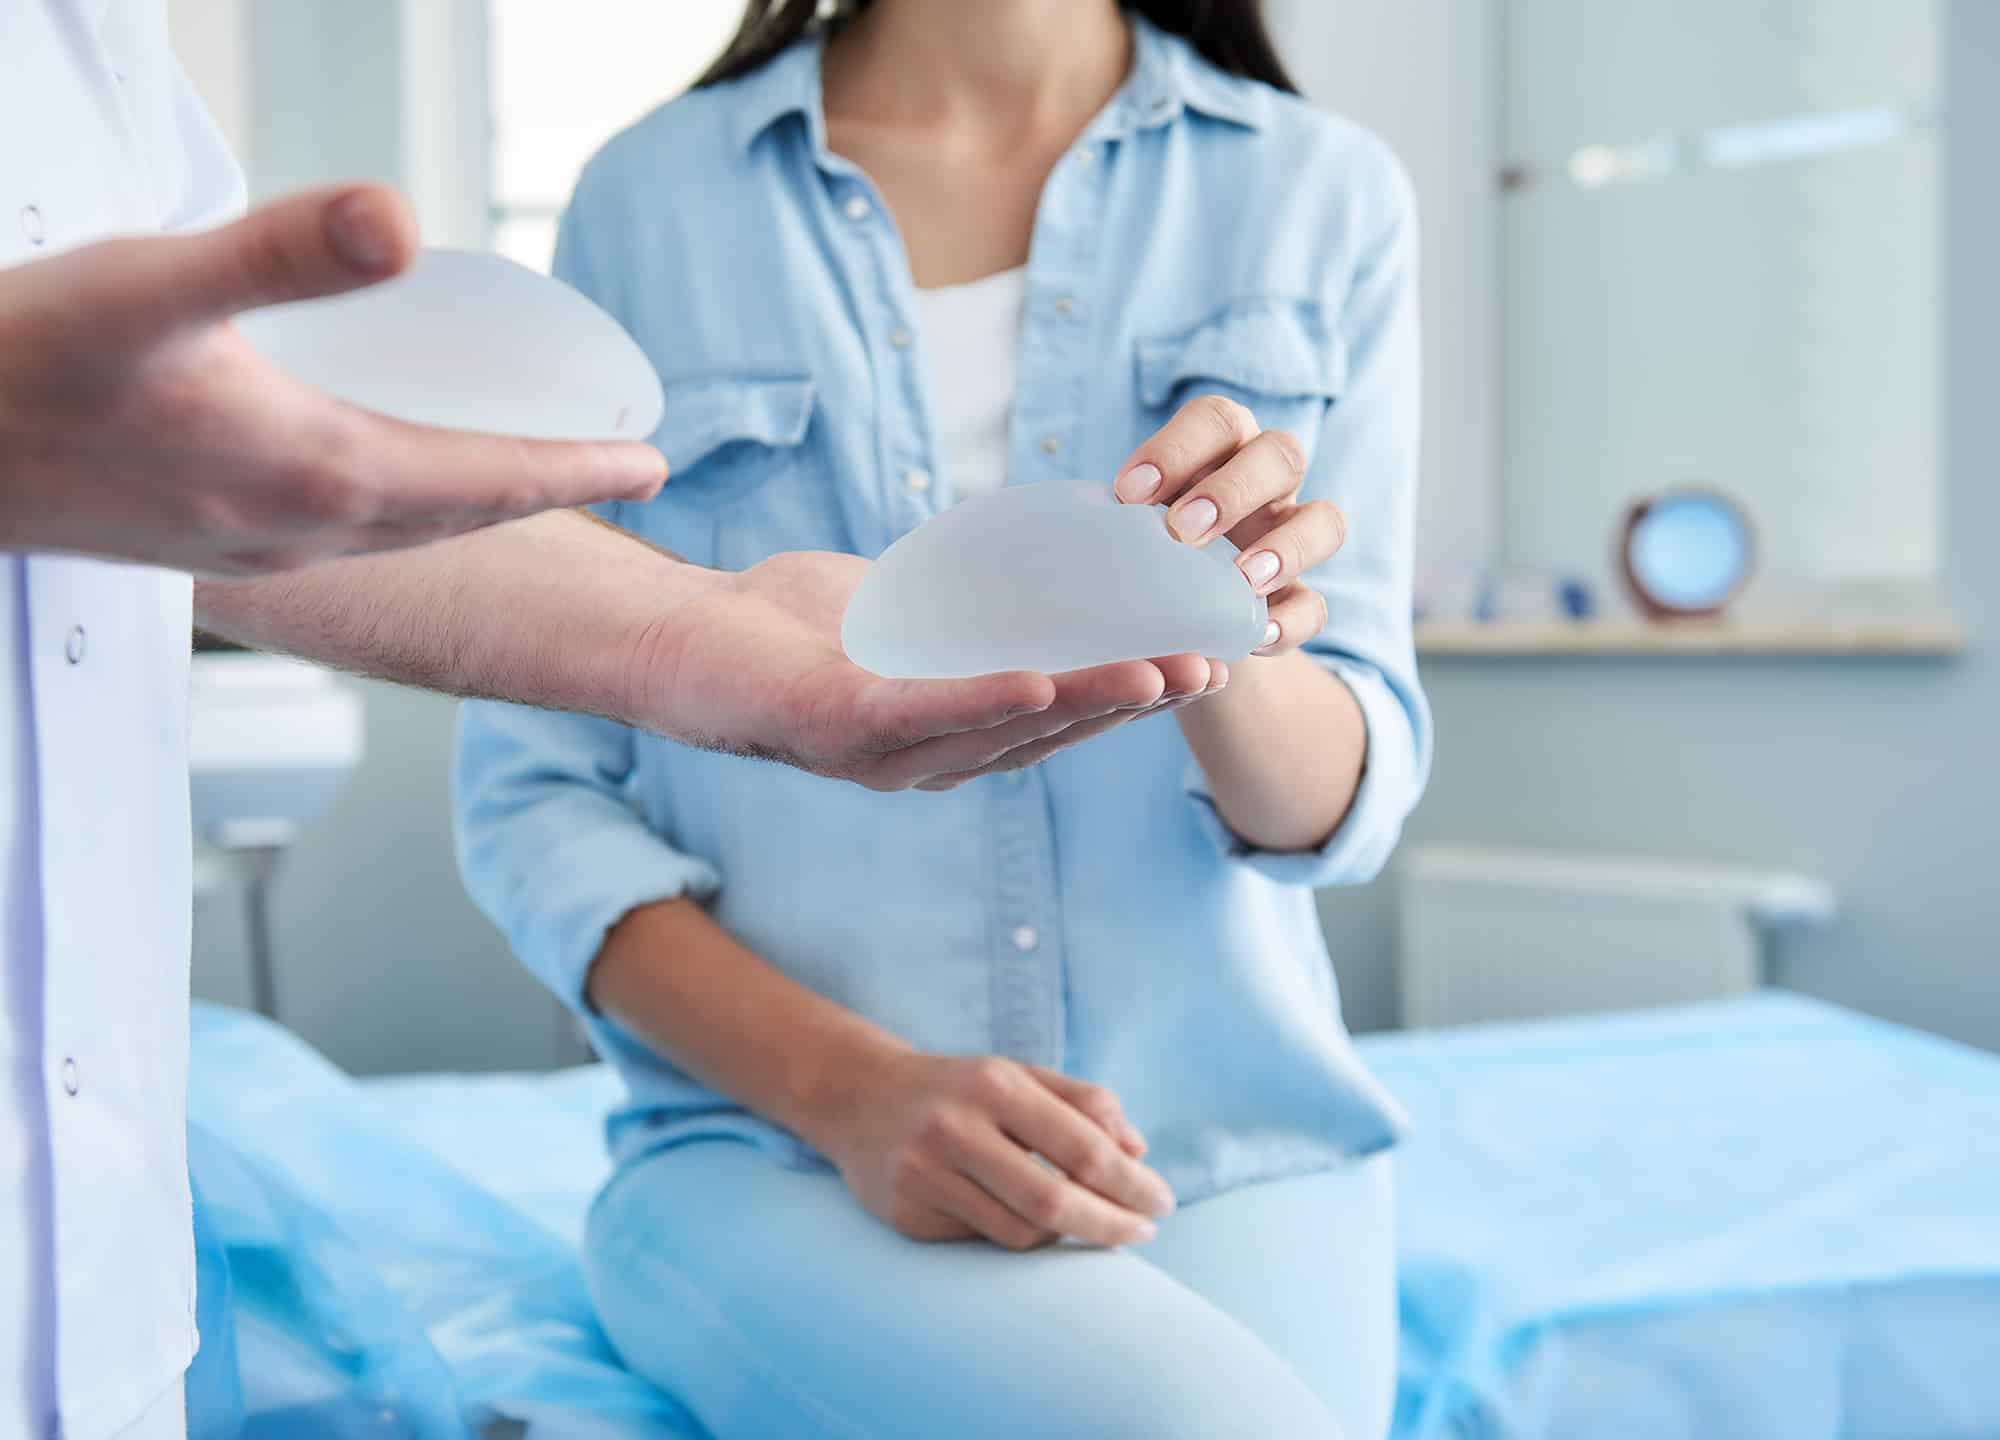 The FDA has released draft guidance proposing that manufacturers print warnings on breast implant packaging to explain the risks and complications.